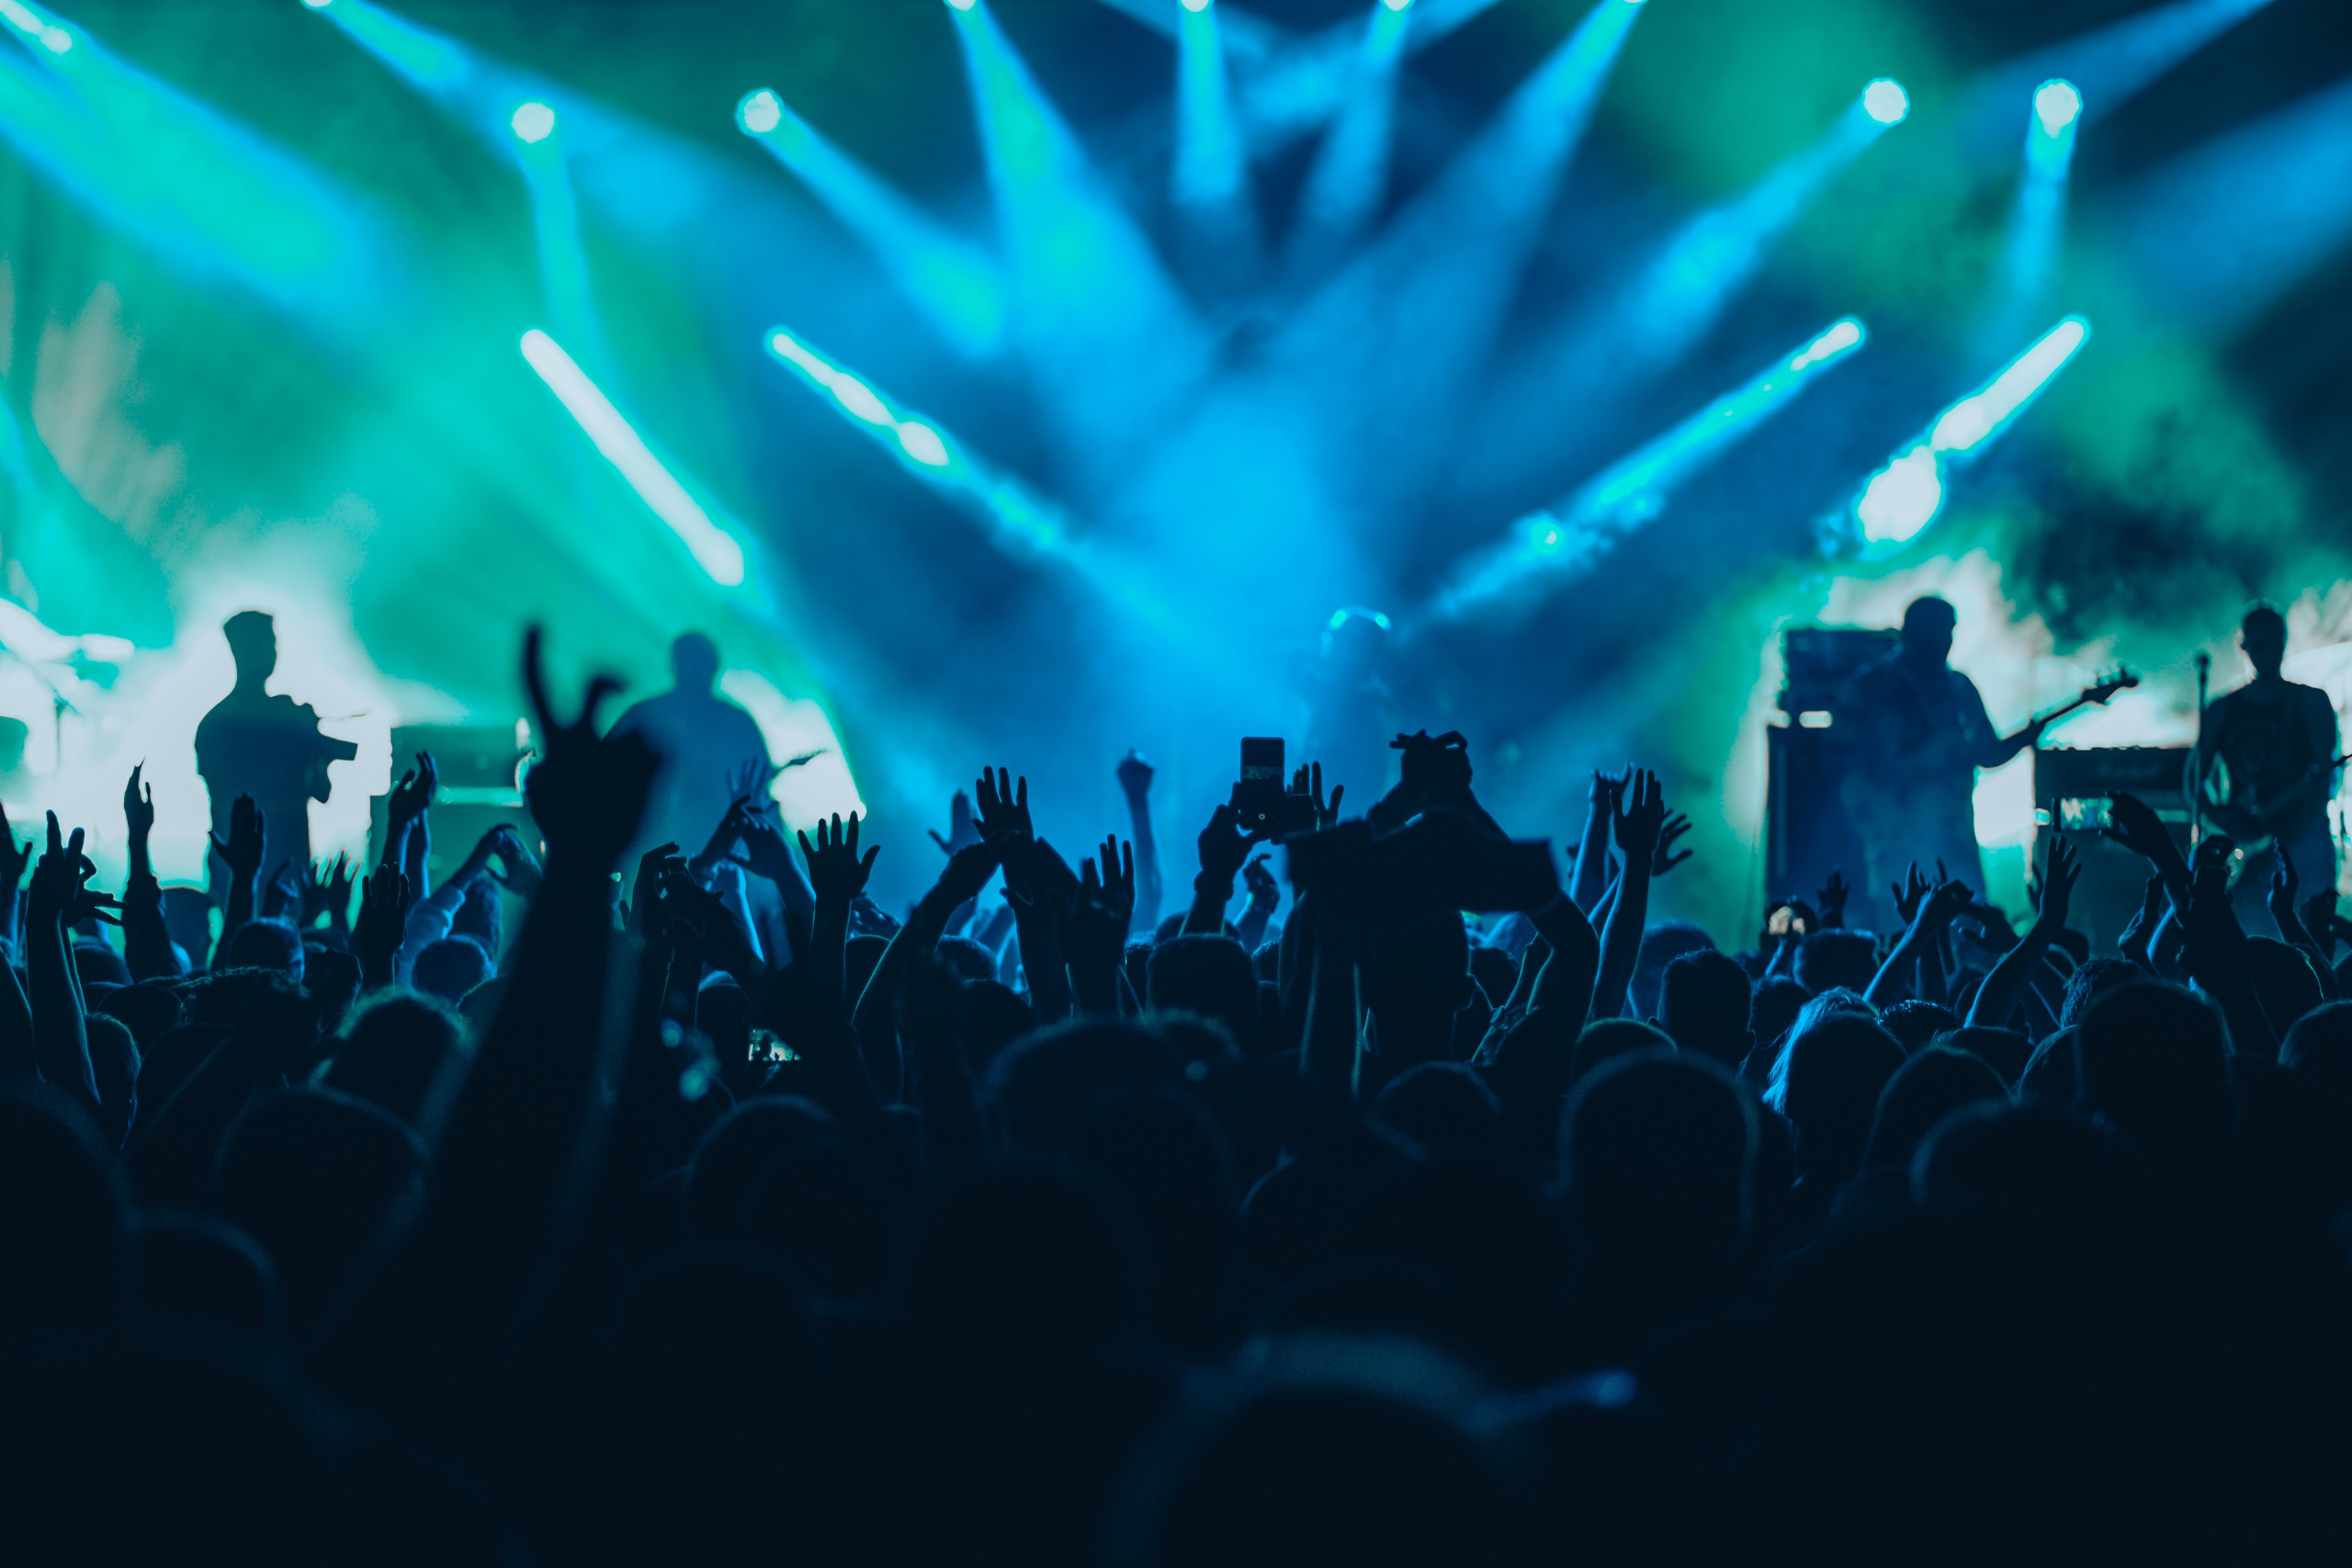 Silhouettes of a concert crowd with raised hands and musicians on stage, illuminated by blue stage lights.